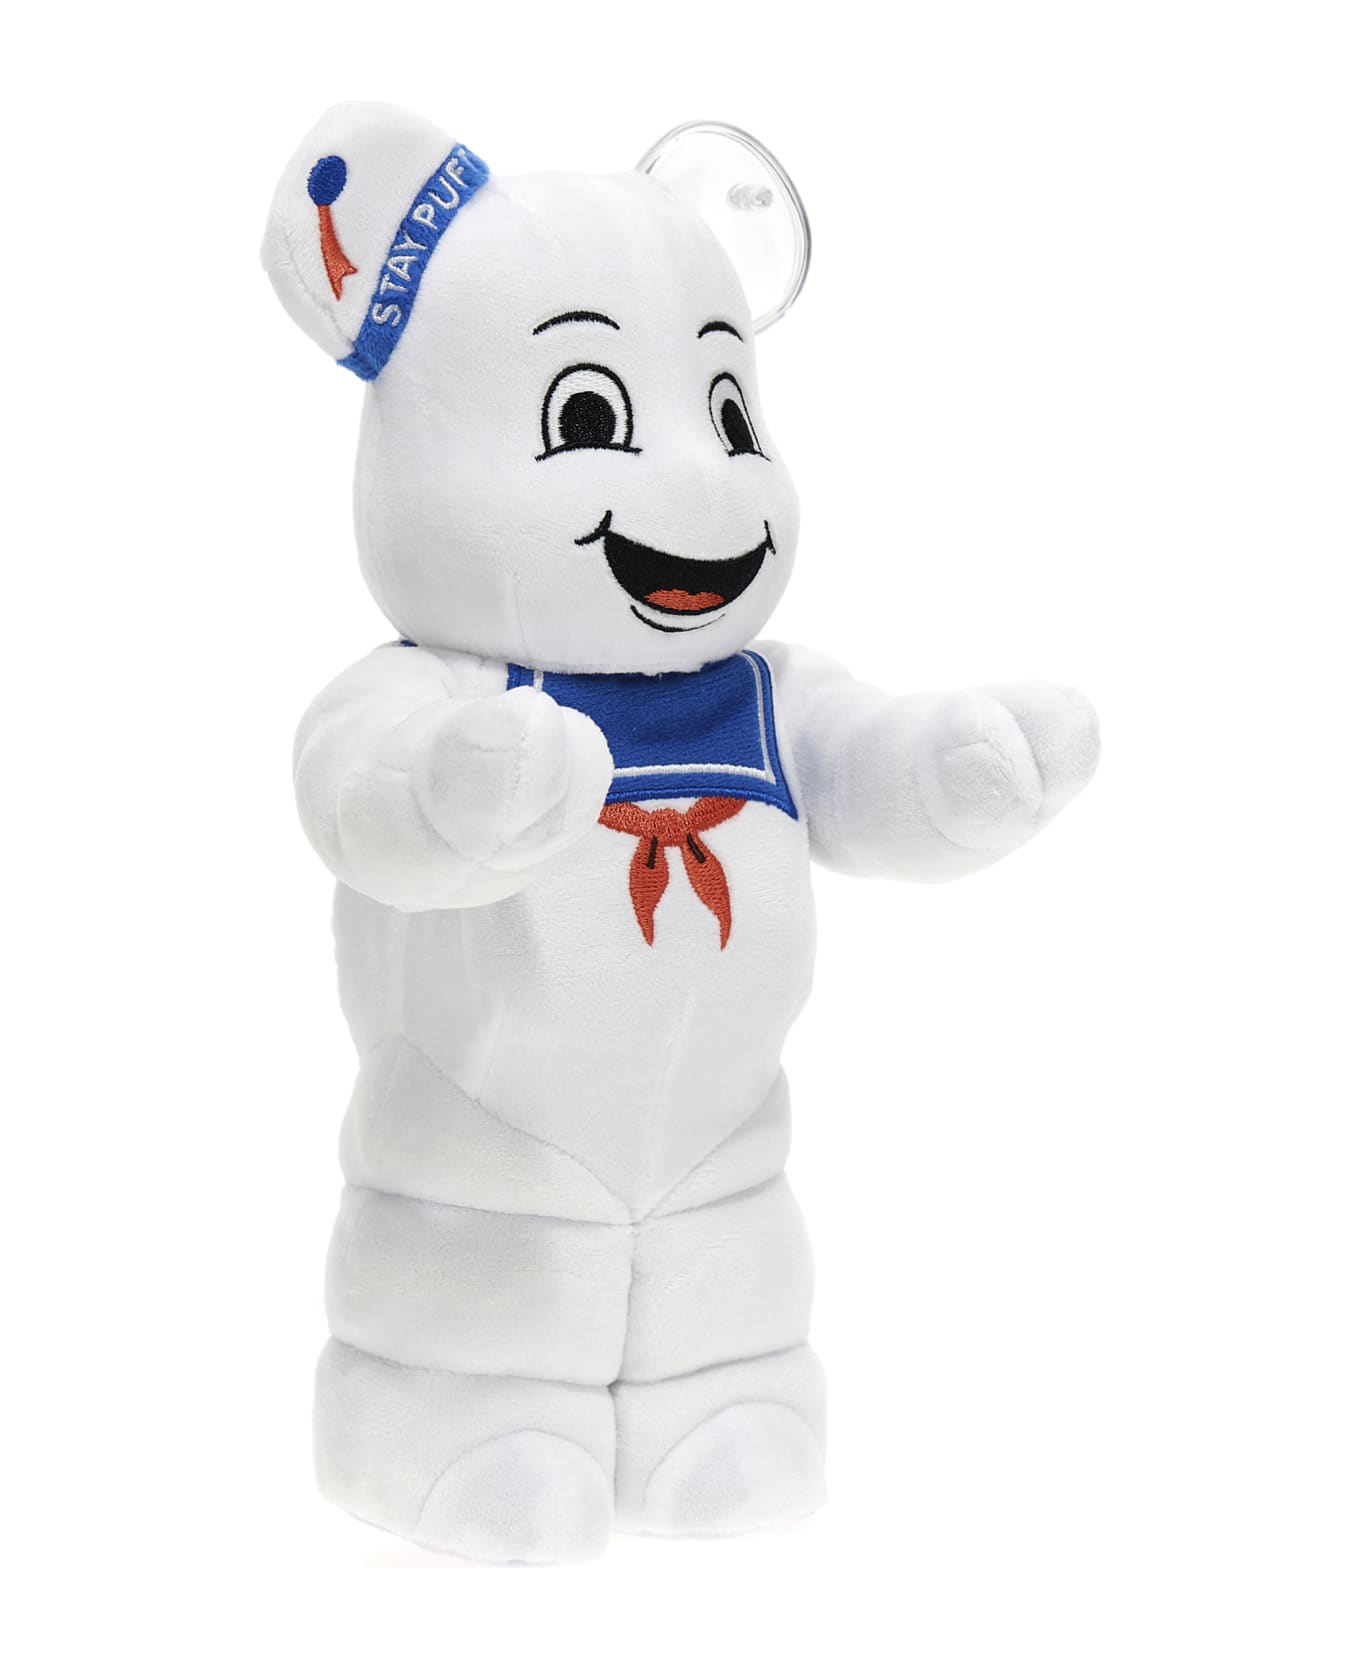 Medicom Toy Be@rbrick 100% And 400% Ghostbusters Stay Puft Marshmallow Man - Multicolor